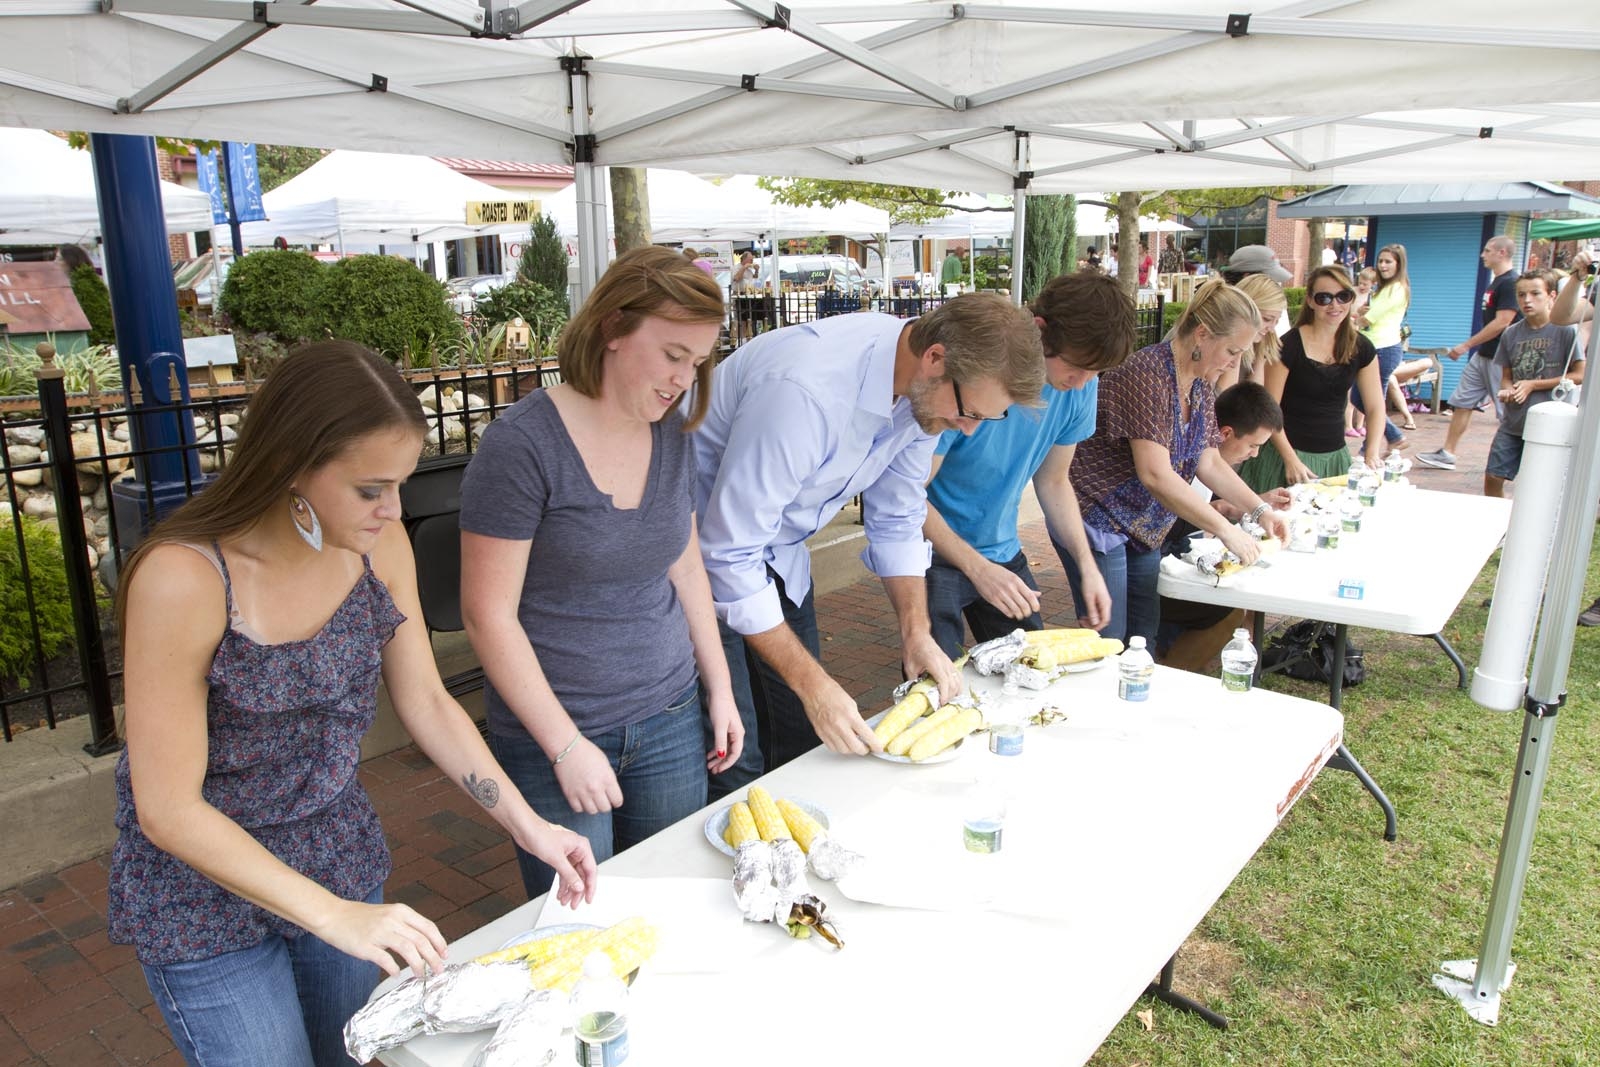 During the annual CornFest event, Fahlgren Mortine team members head over to the Easton Farmer's Market to see who can eat three ears of corn the fastest. The victor gets the honor of being the CornFest champ for the year, and the coveted golden corn holders.